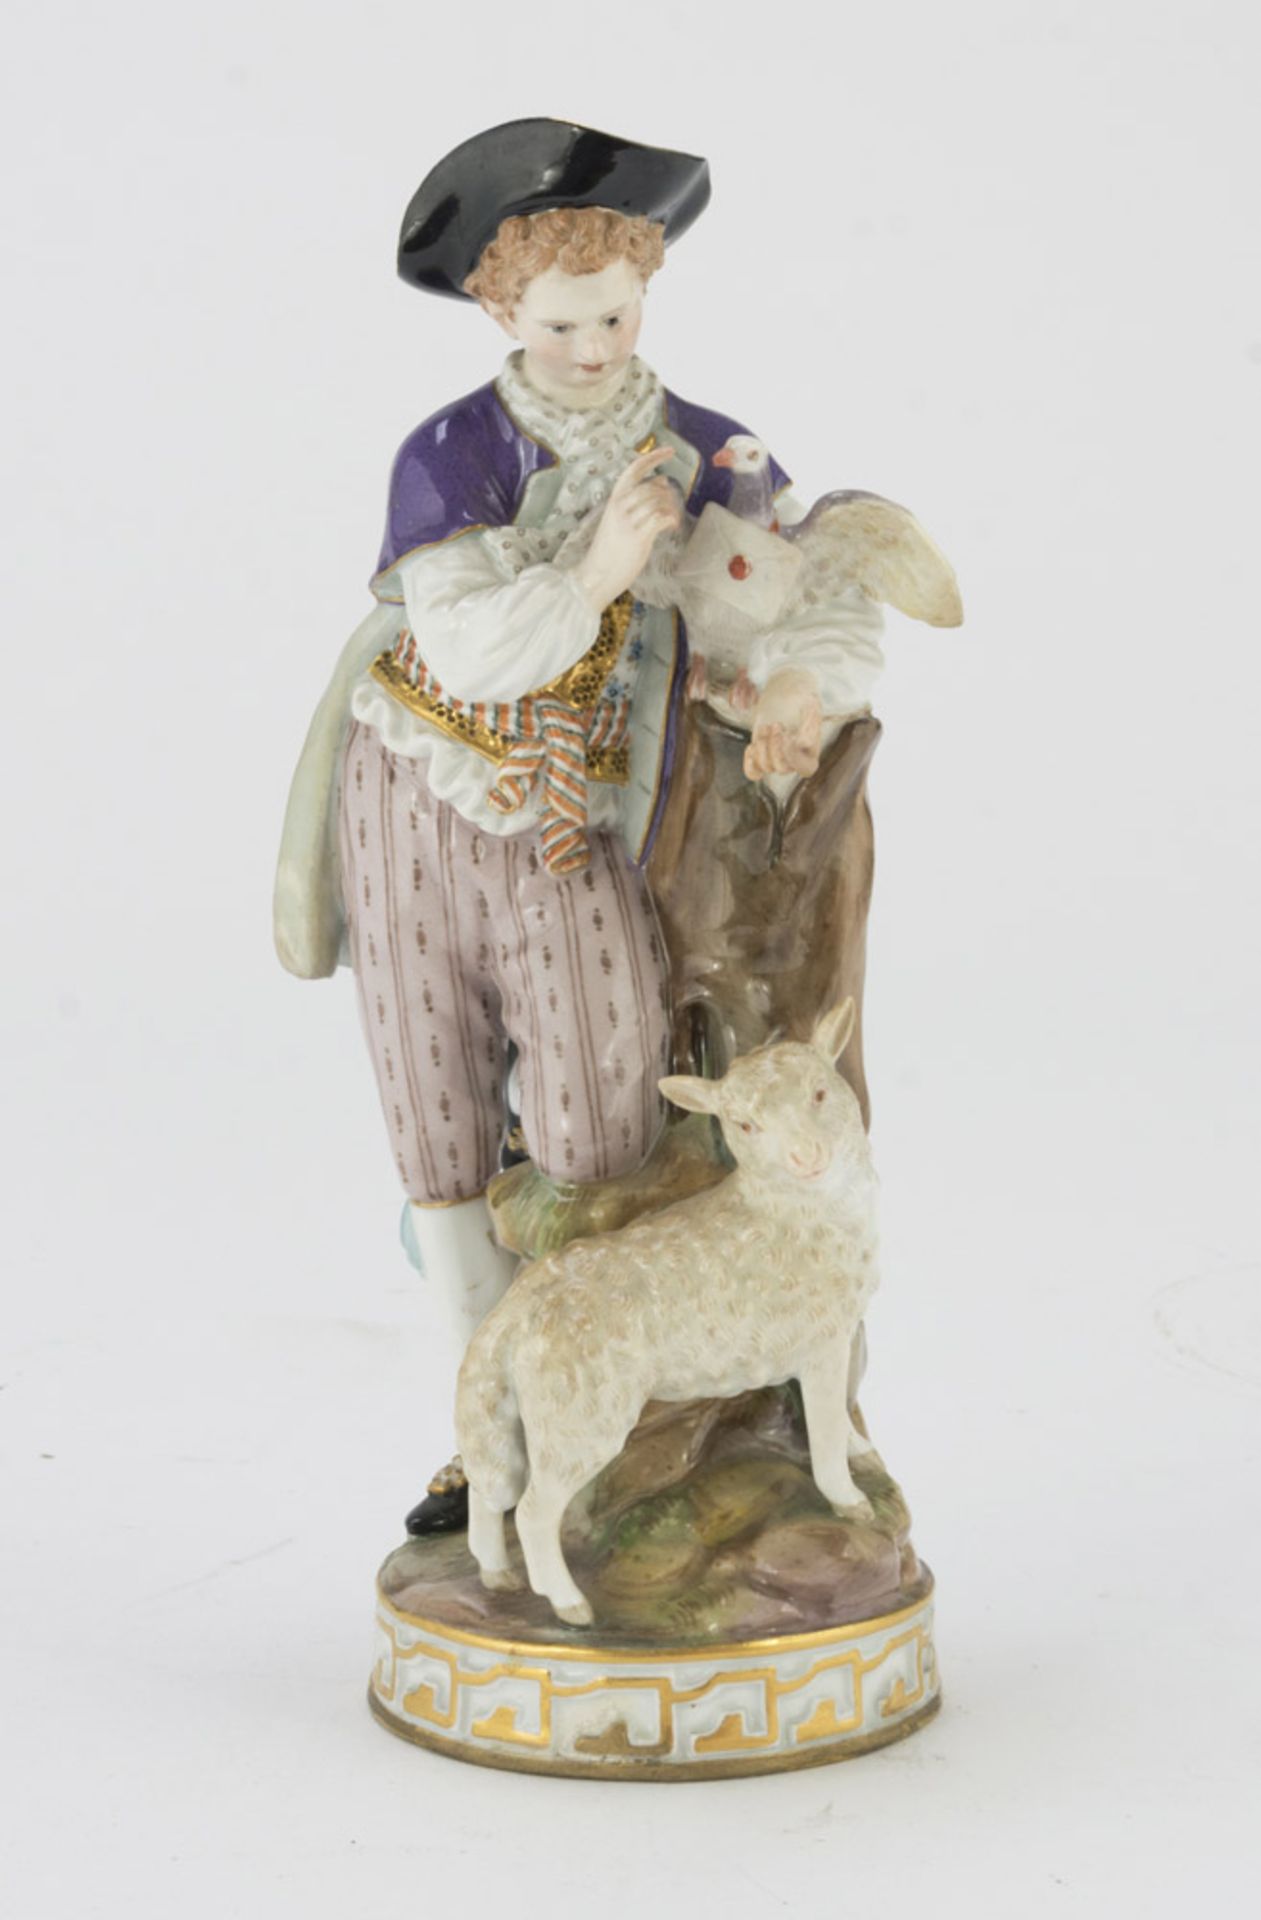 PORCELAIN FIGURE OF YOUNG SHEPHERD – MEISSEN LATE 19TH CENTURY